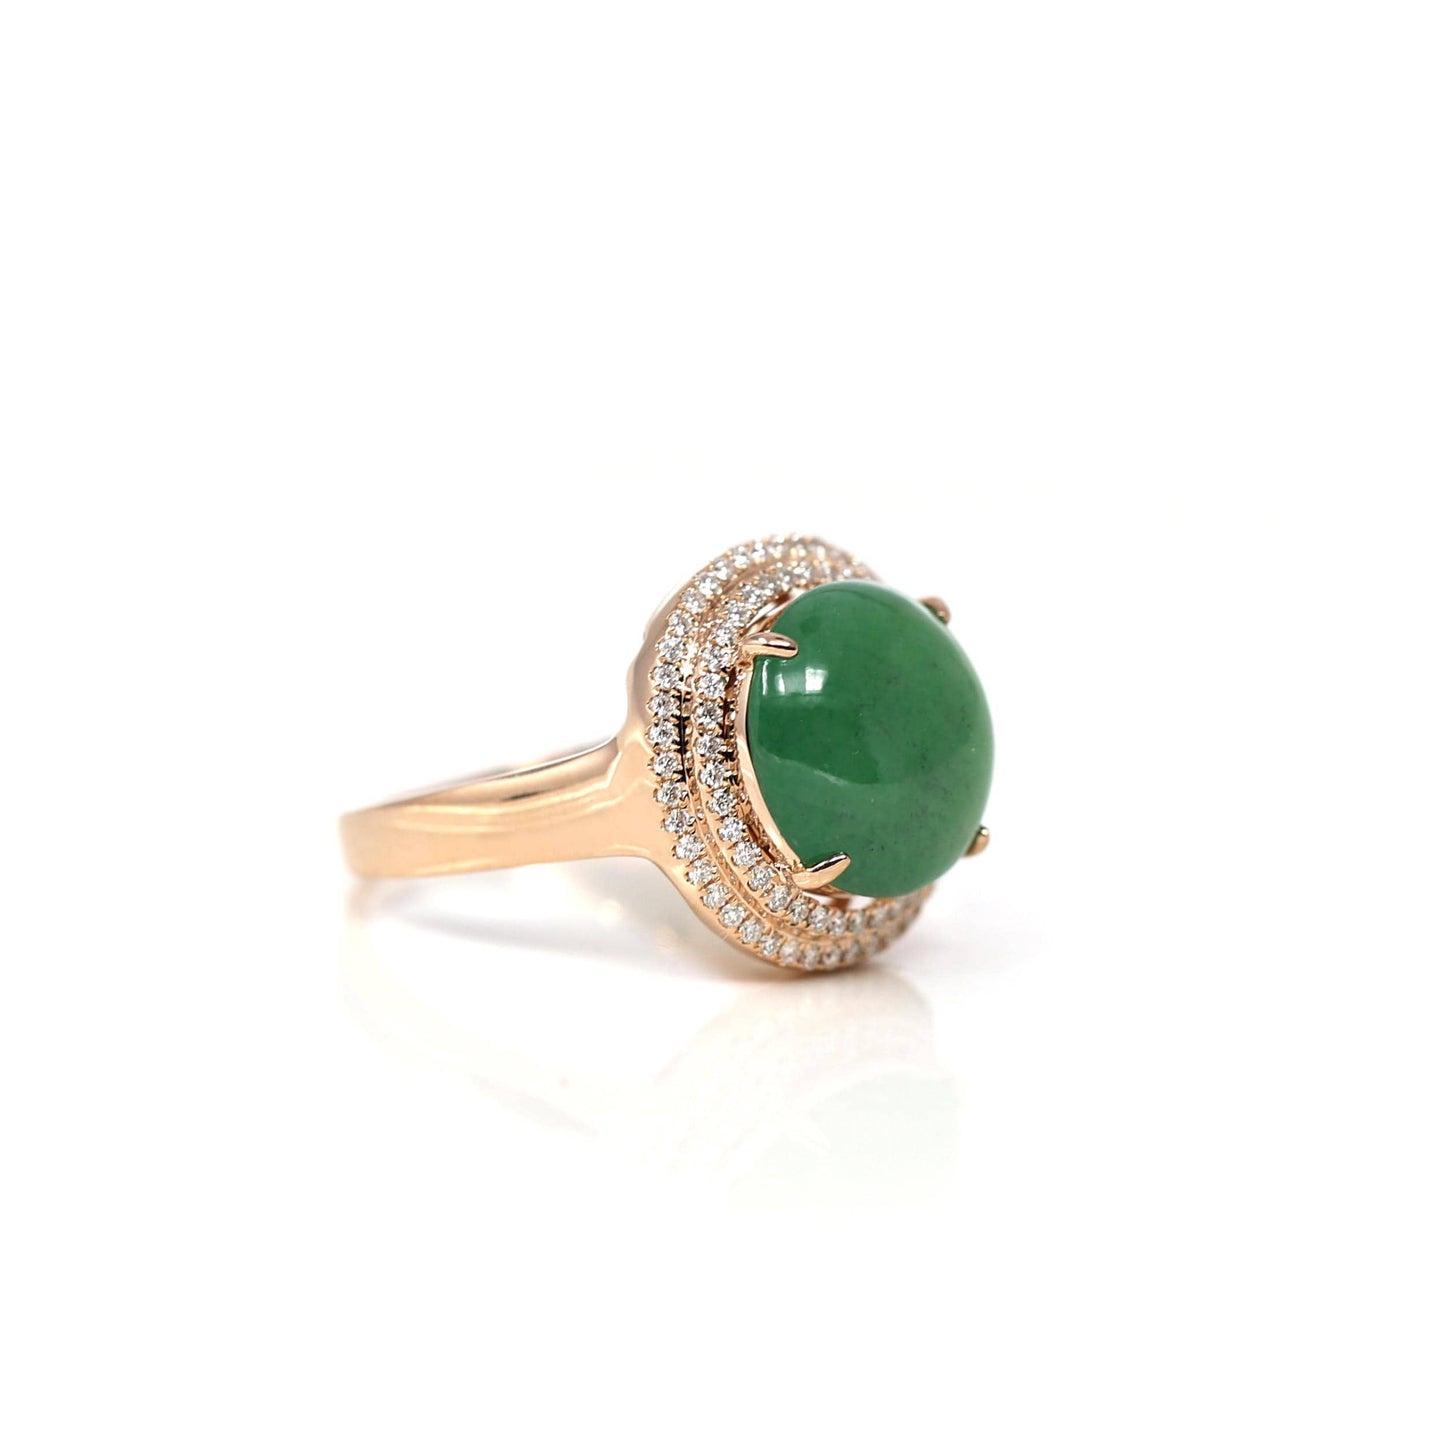 RealJade¨ Co. Jadeite Engagement Ring 18k Rose Gold Natural Imperial Green Oval Jadeite Jade Engagement Ring With Diamonds